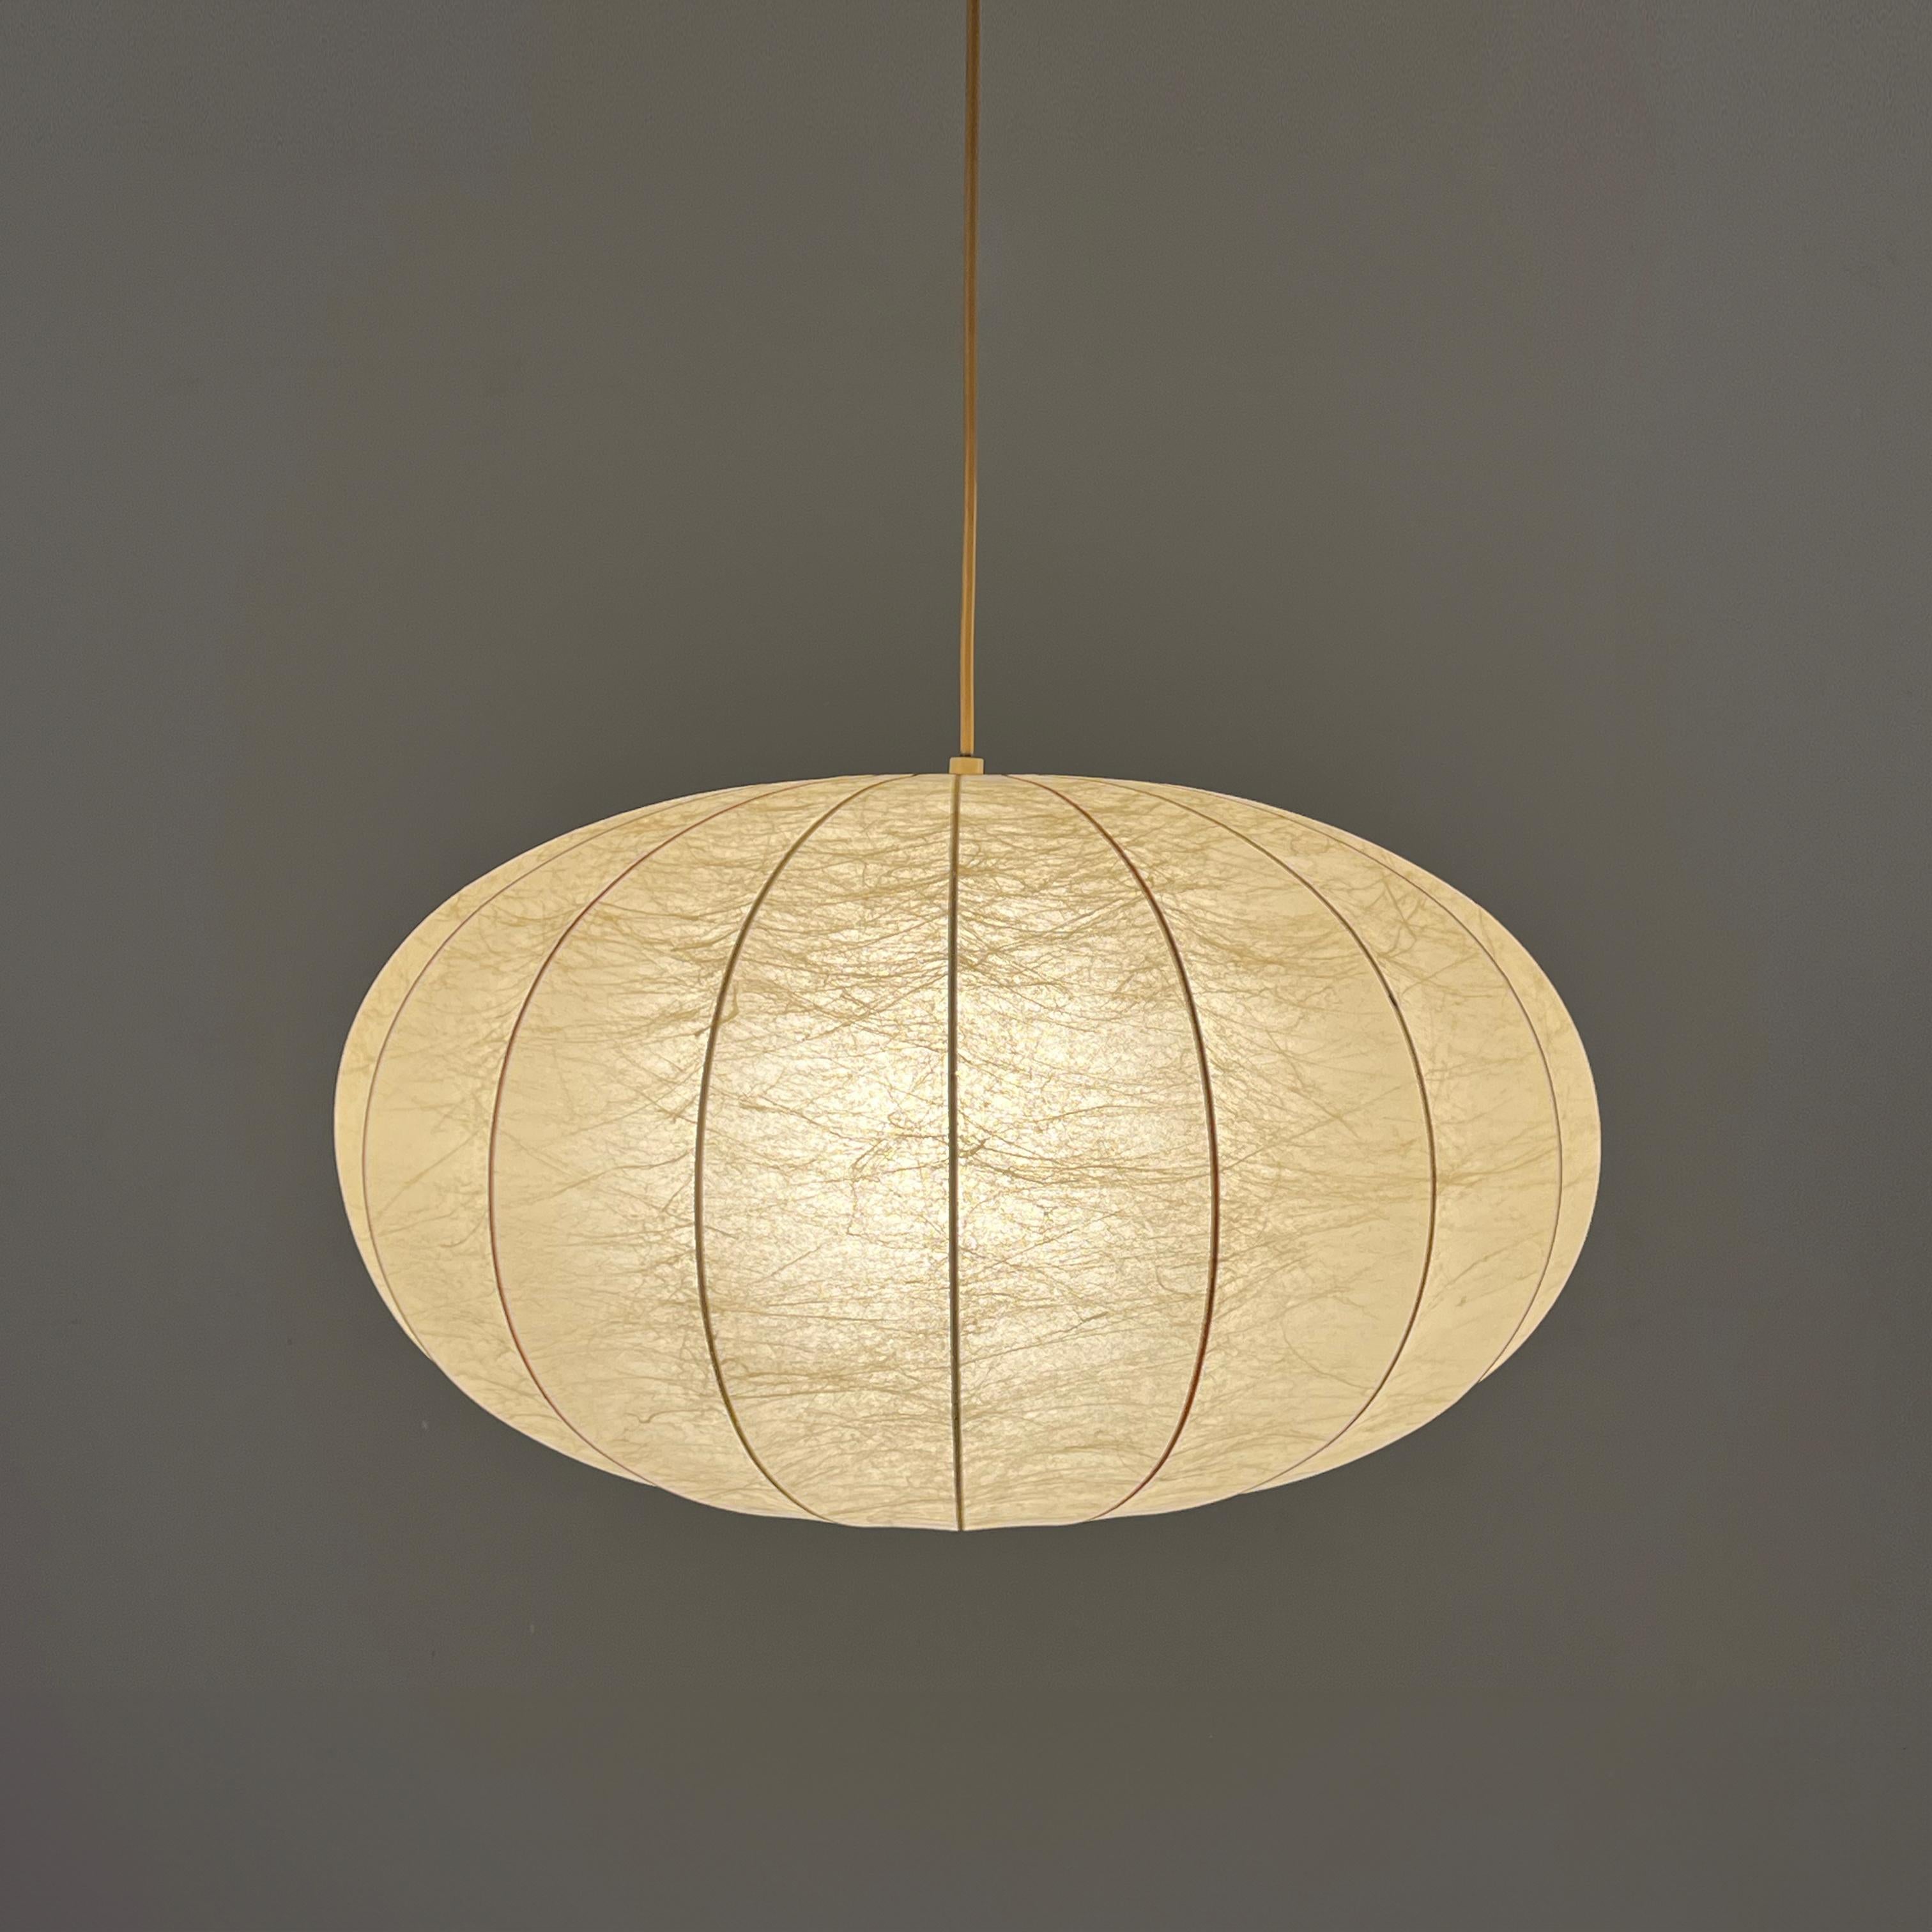 21.6 Inches Space Age Cocoon Pendant Lamp by Friedel Wauer for Goldkant Leuchten 5